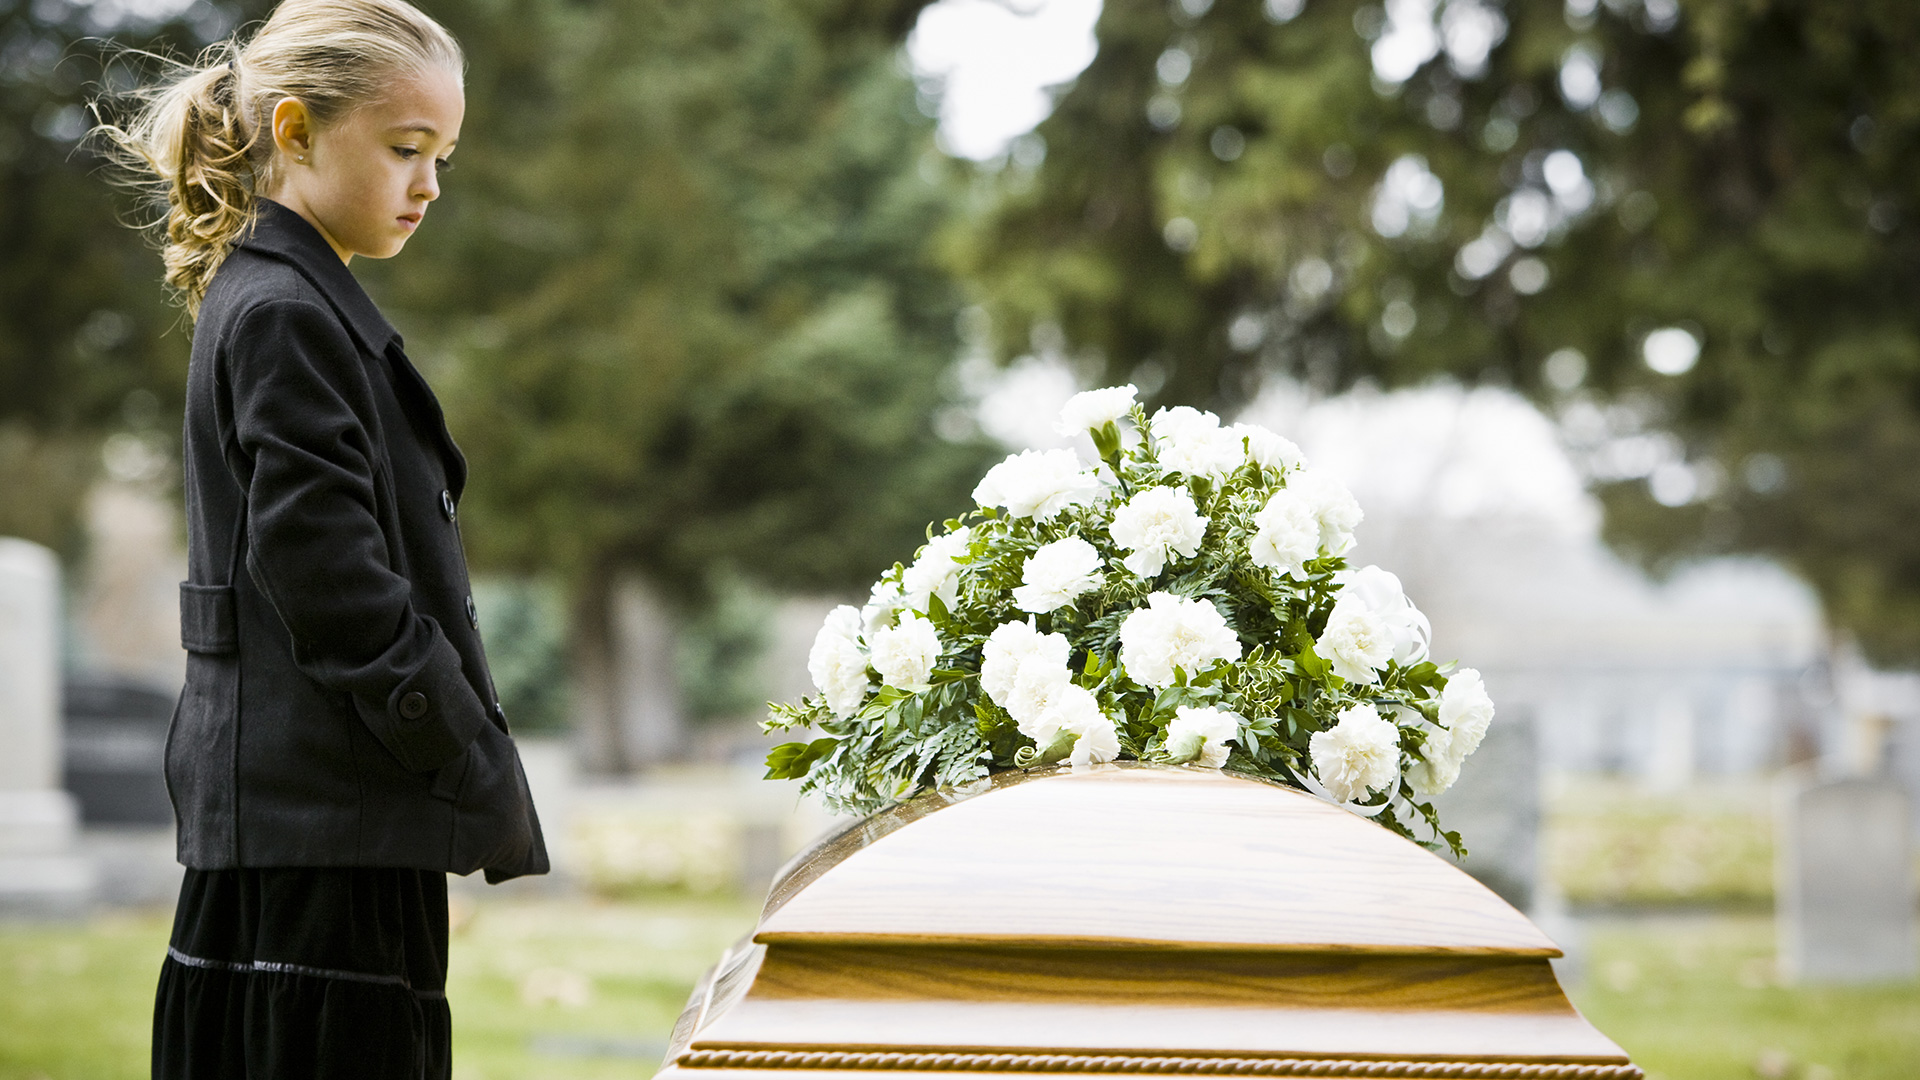 Kid's Hilarious (and Real) Ad for a Funeral Home Goes Viral, but Not E...